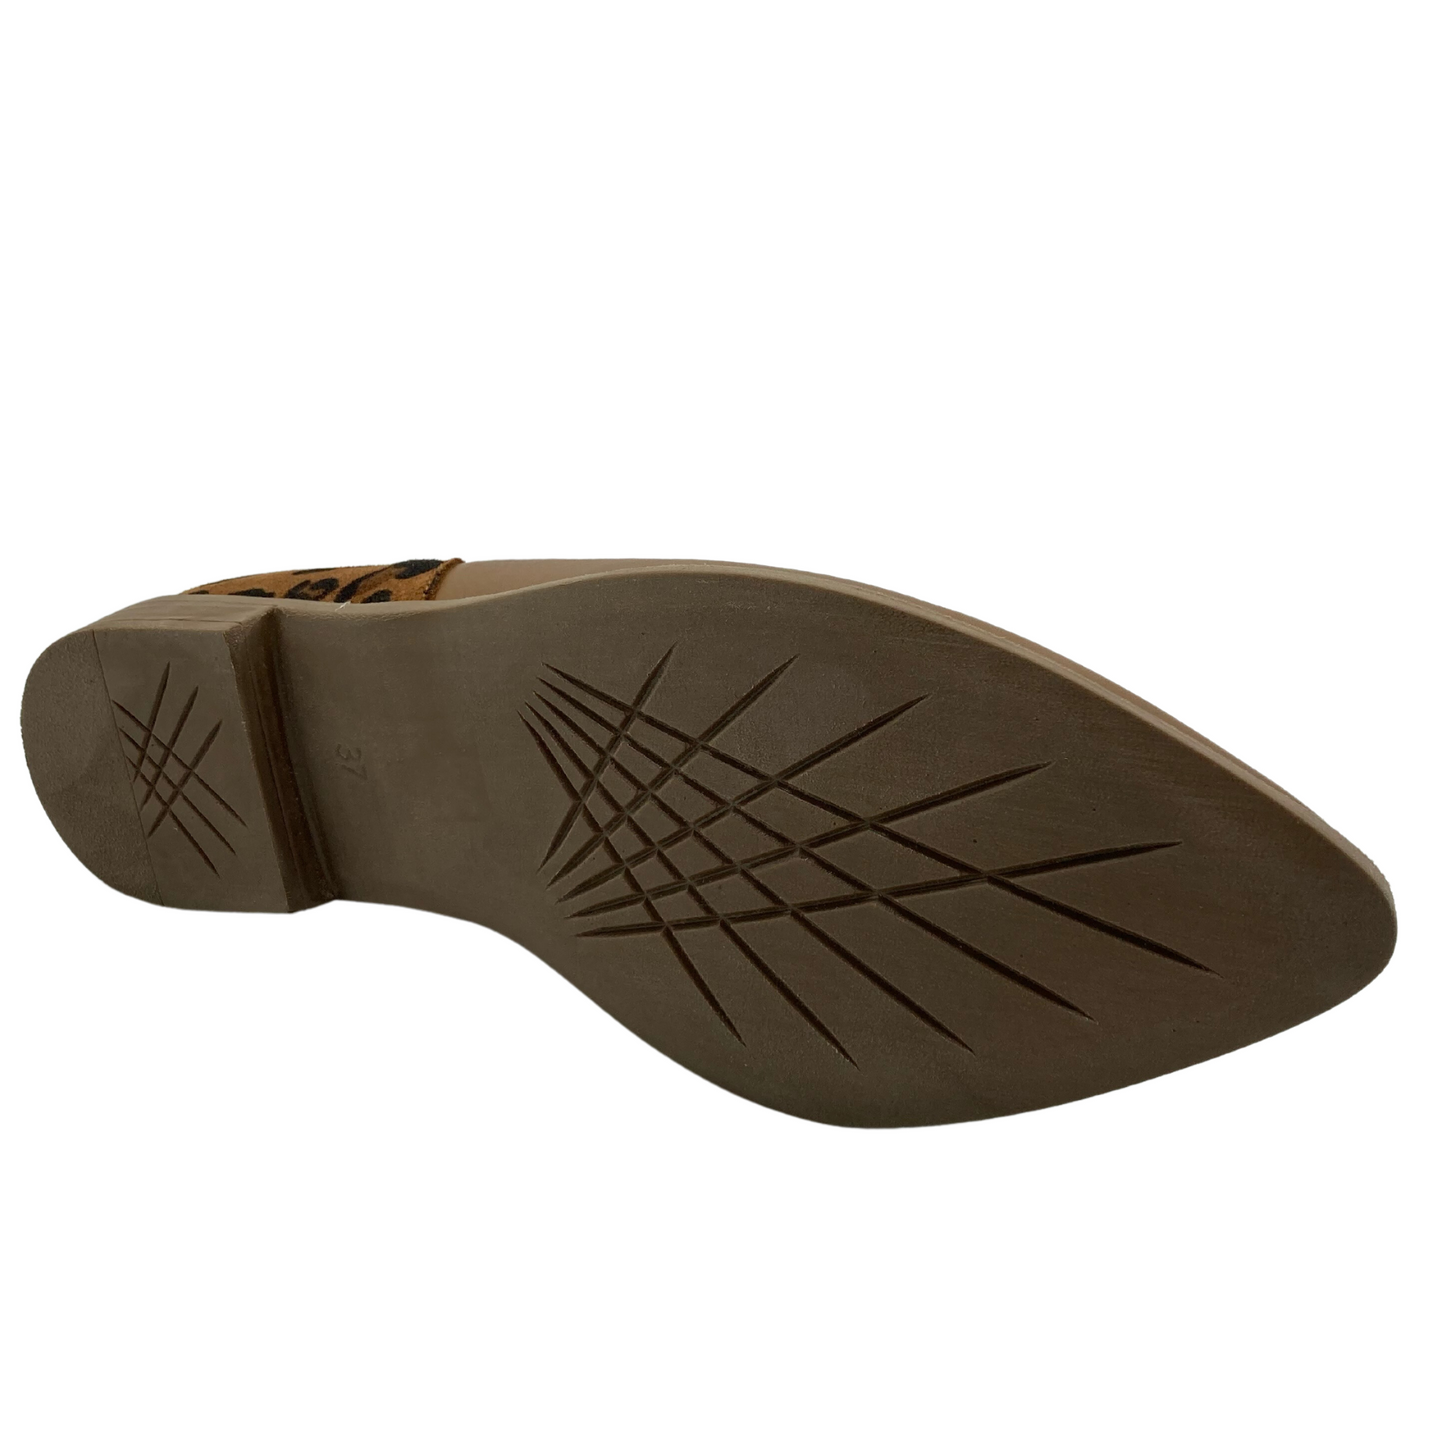 View of the bottom of brown flat shoe with rubber sole